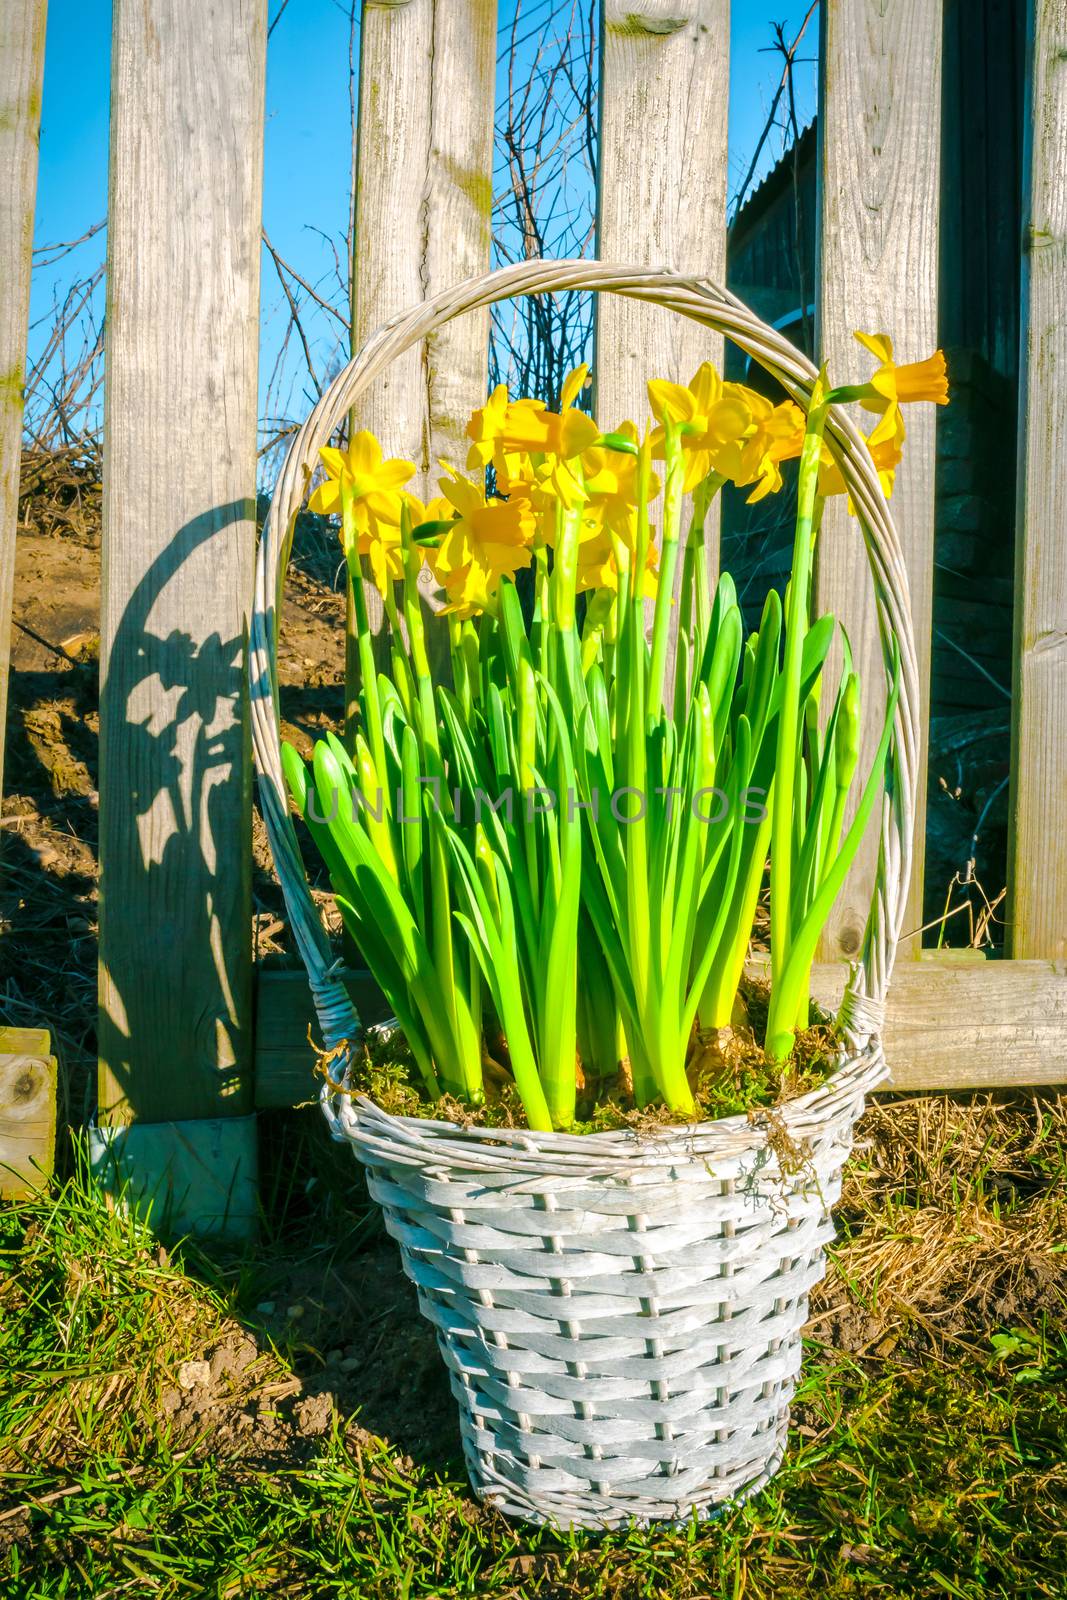 Basket with yellow daffodils in the garden